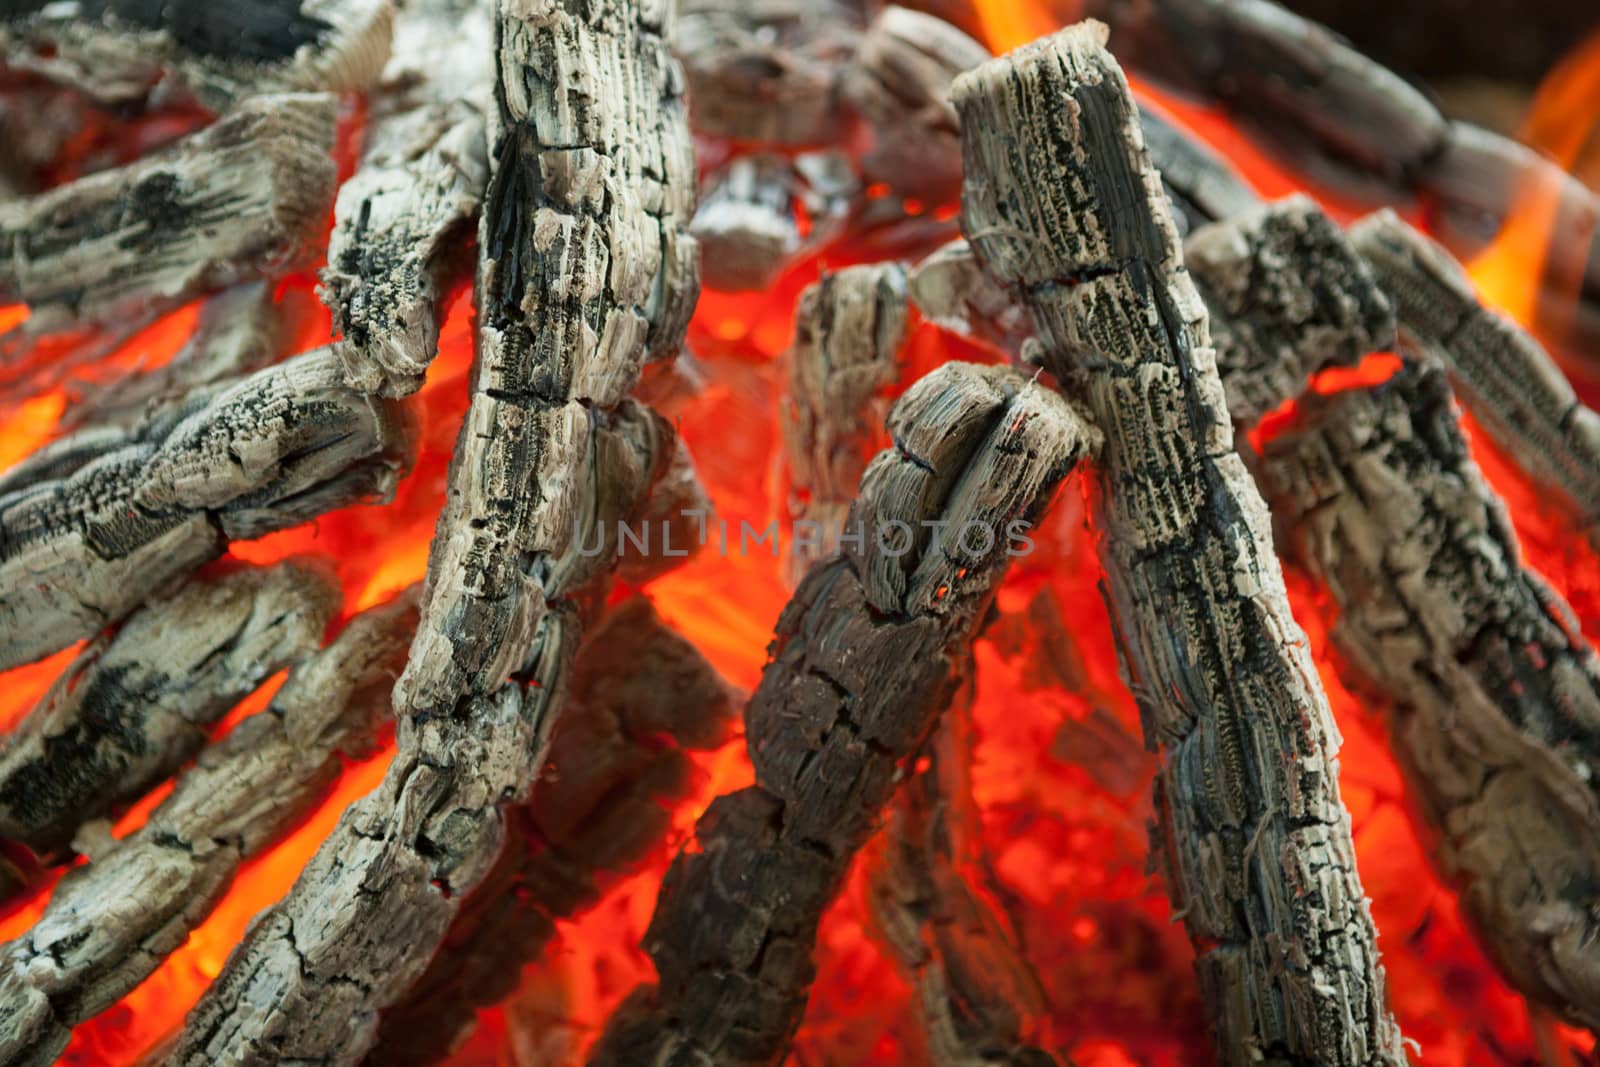 Beautiful fire with flames charred wood by mcherevan